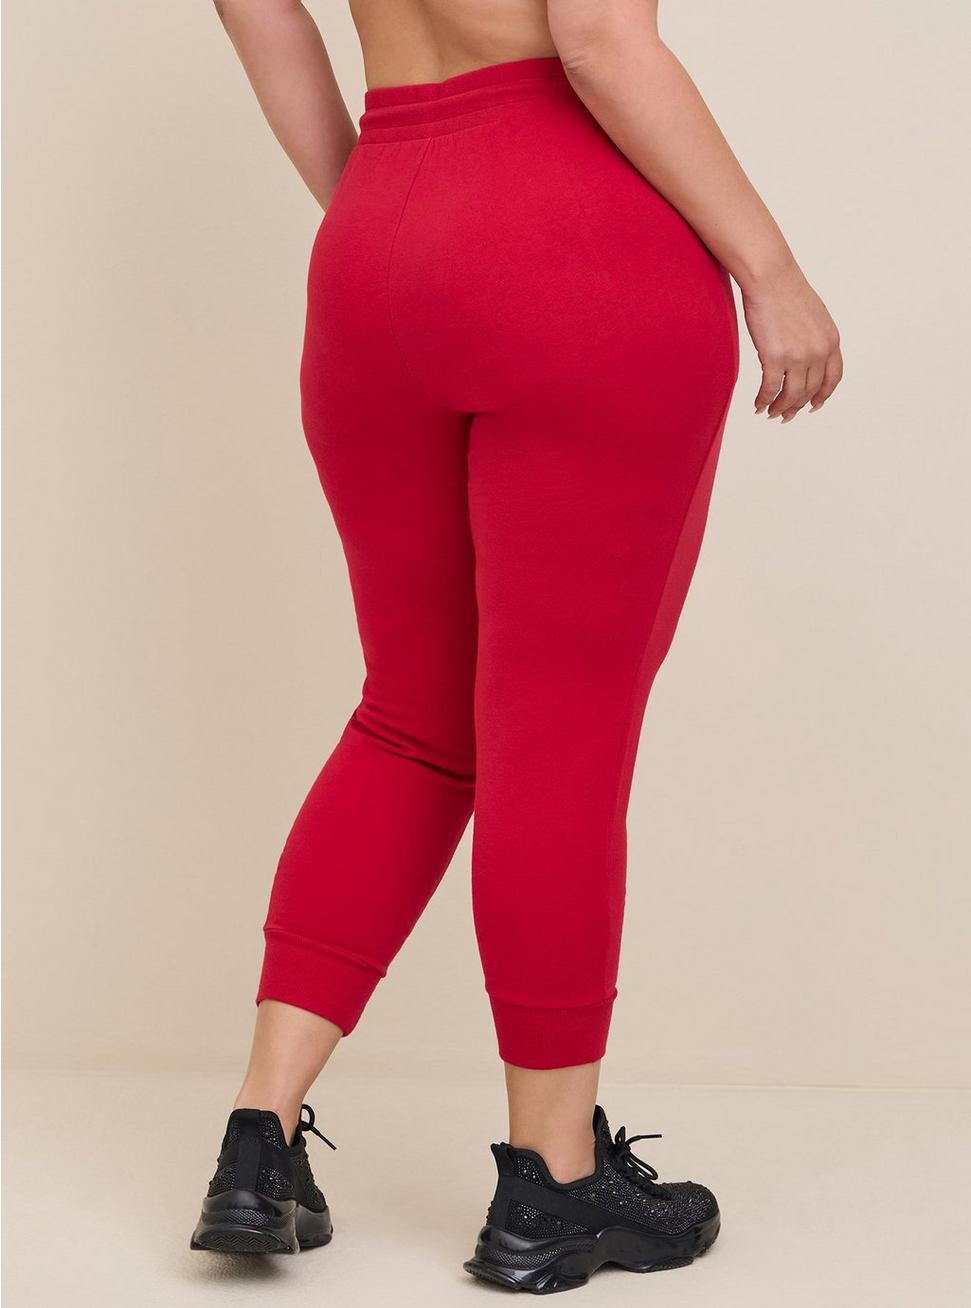 Everyday Fleece Crop Active Jogger In Classic Fit, JESTER RED, alternate